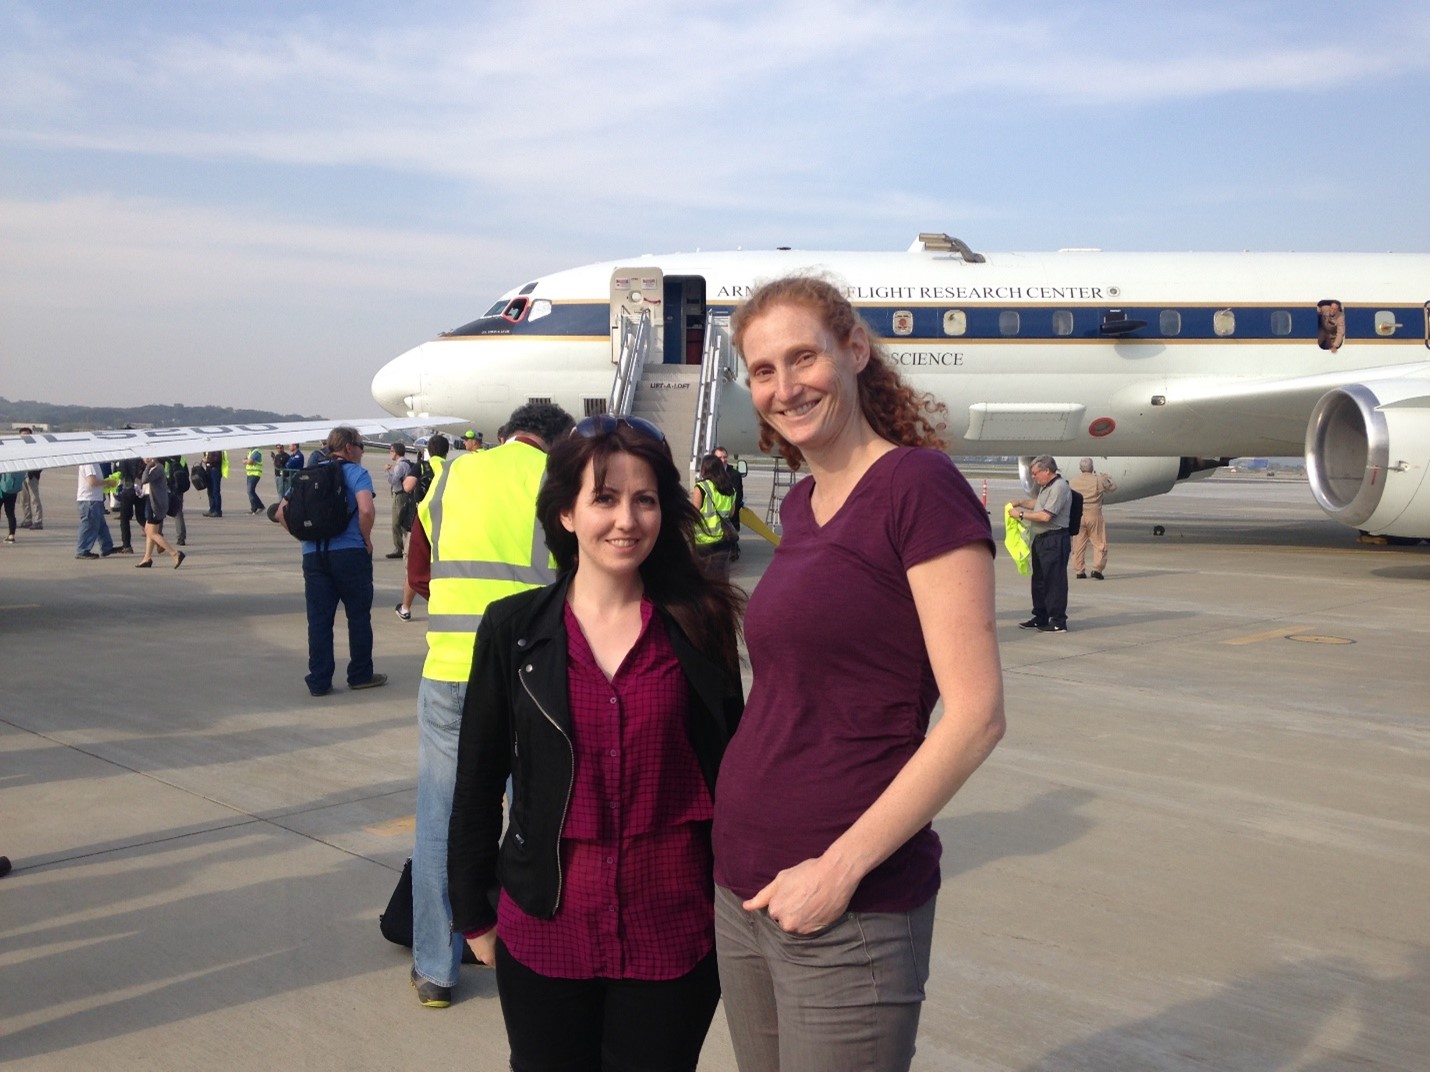 Lamb, at left, is pictured with colleague Anne Perring of Colgate University. Behind them is the NASA DC-8 during its field deployment in South Korea during the 2016 Korea-United States Air Quality (KORUS-AQ) field study.